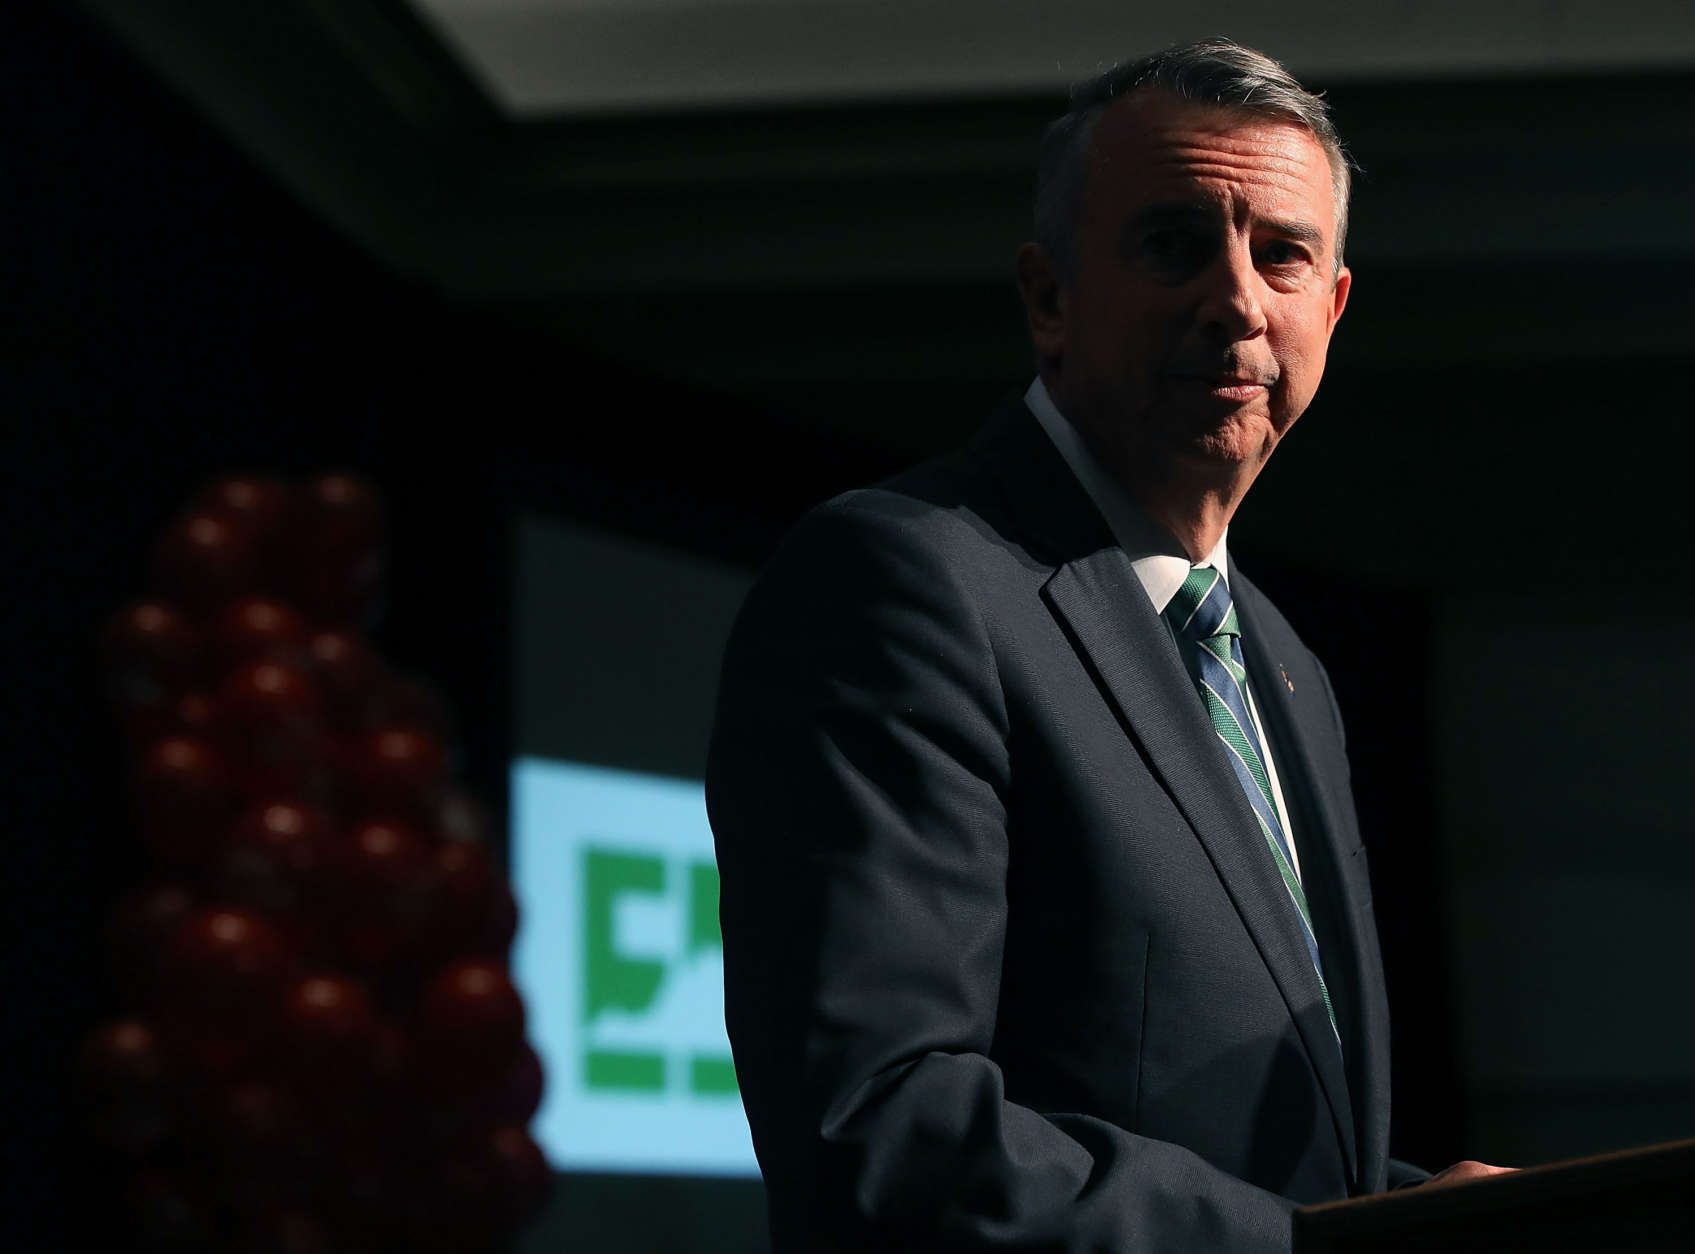 RICHMOND, VA - NOVEMBER 07:  Republican gubernatorial candidate Ed Gillespie speaks at an election night rally on November 7, 2017 in Richmond, Virginia. Gillespie was projected to lose to Democrat Ralph Northam.  (Photo by Mark Wilson/Getty Images)